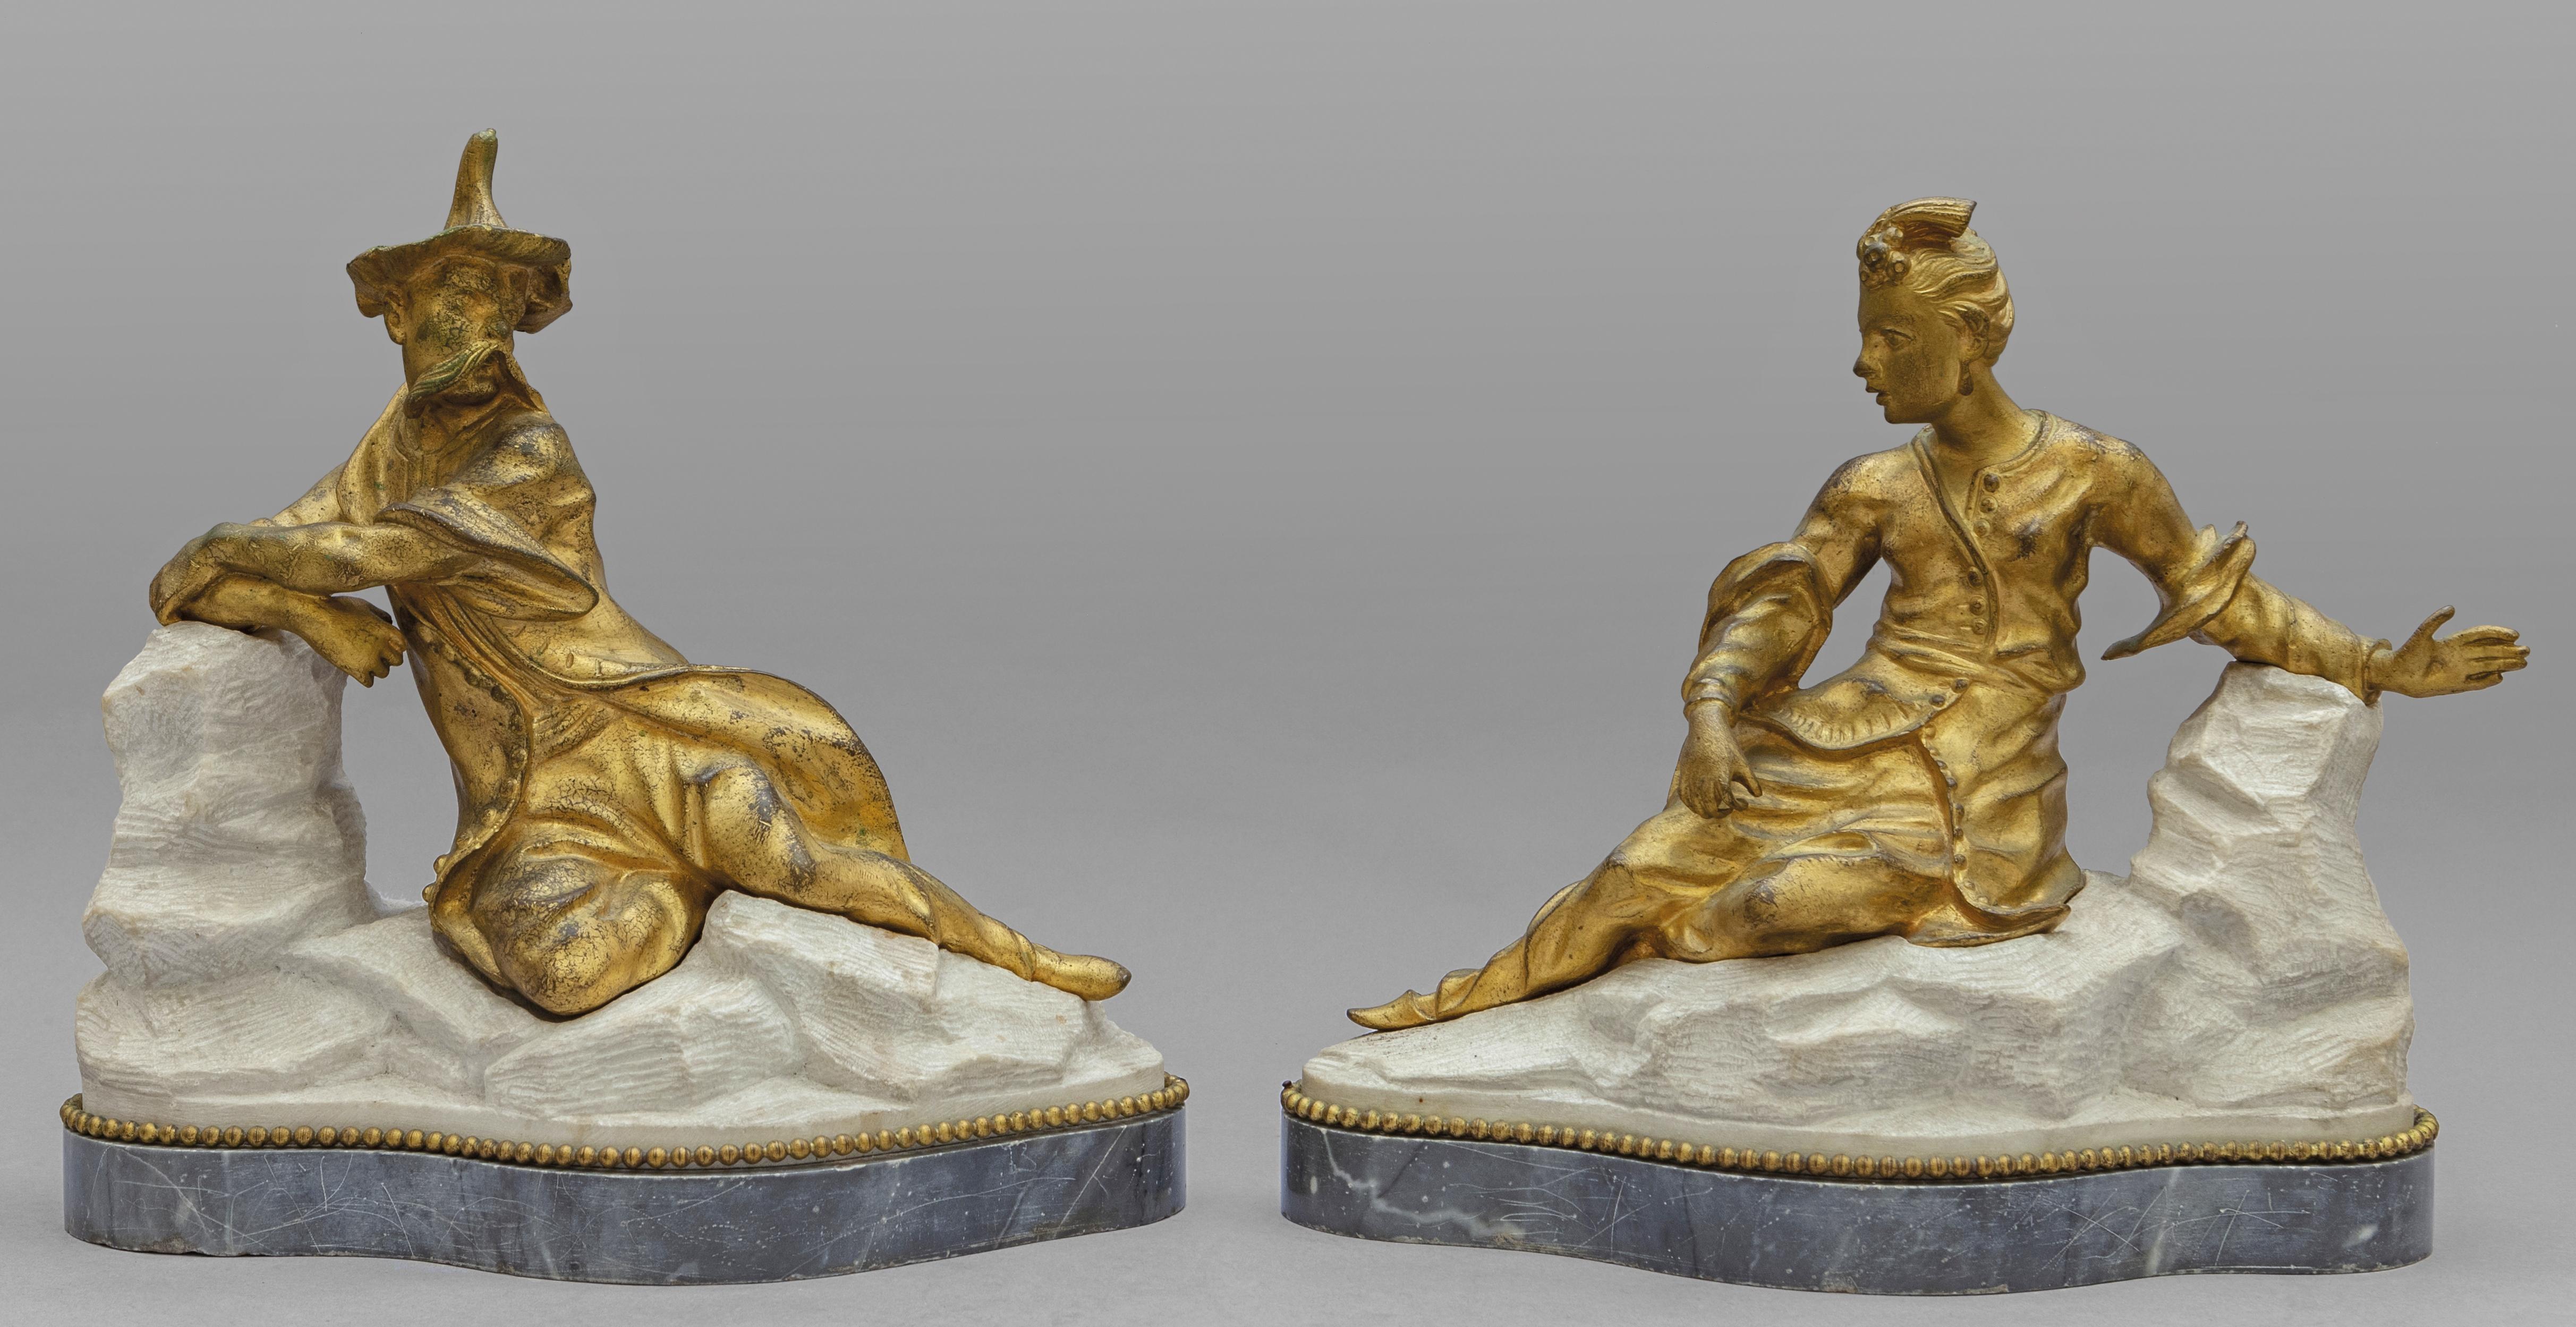 18th century pair of french gilt bronze sculptures on marble base representing Chinese figures

This particular and lovely pair of sculptures was made in France in the 18th century. It consists of two figures, one male and one female, made of